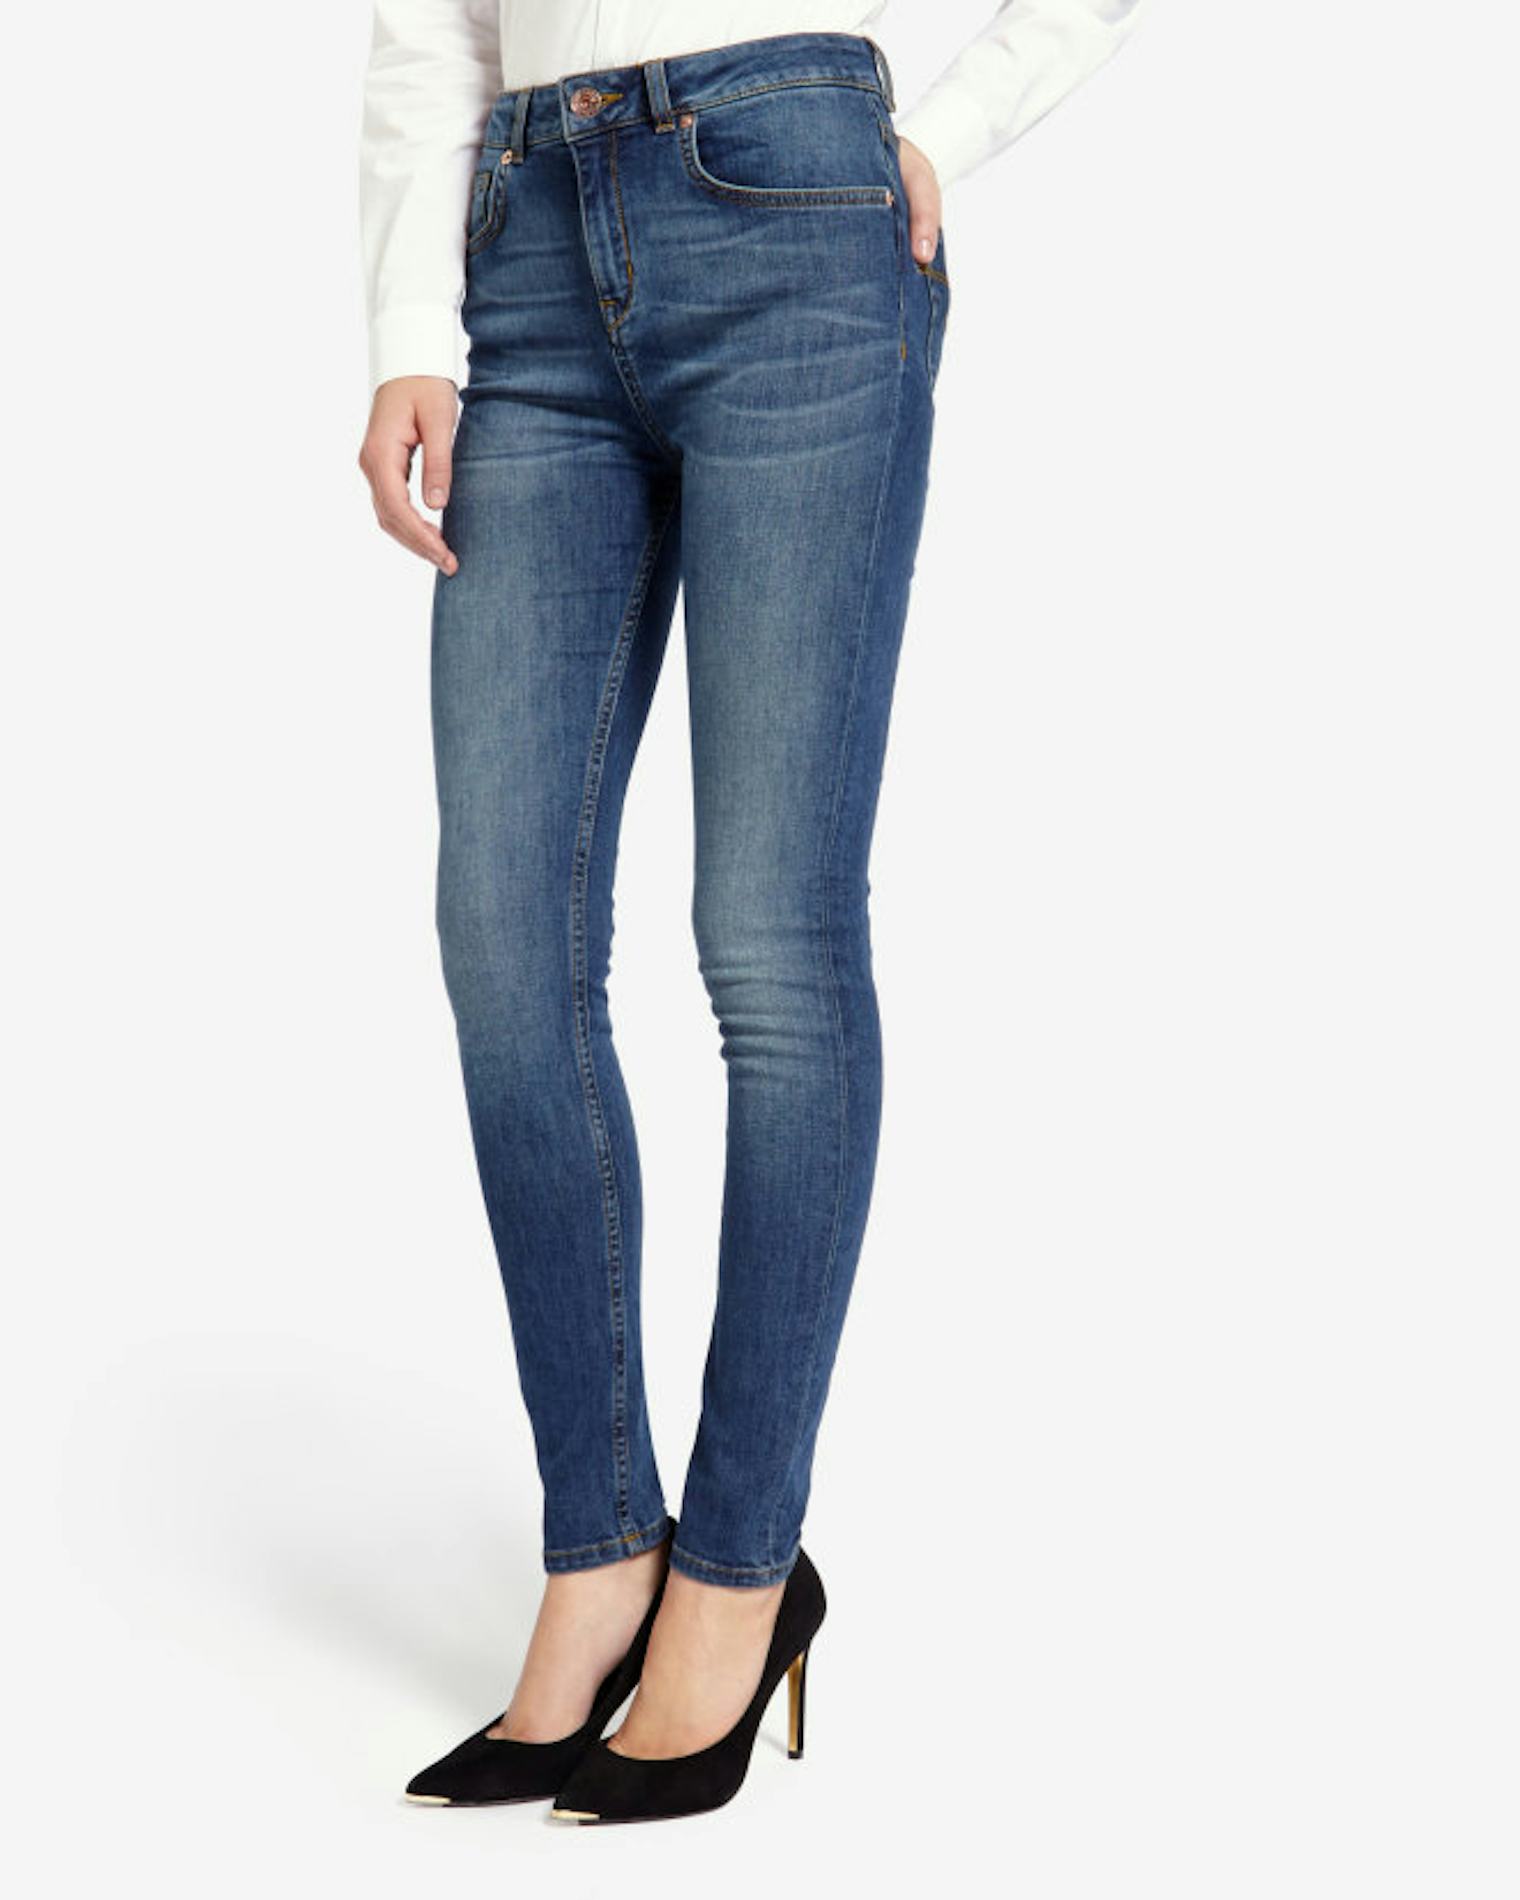 7 Jeans Every Woman Should Consider Owning Once In Her Life — PHOTOS